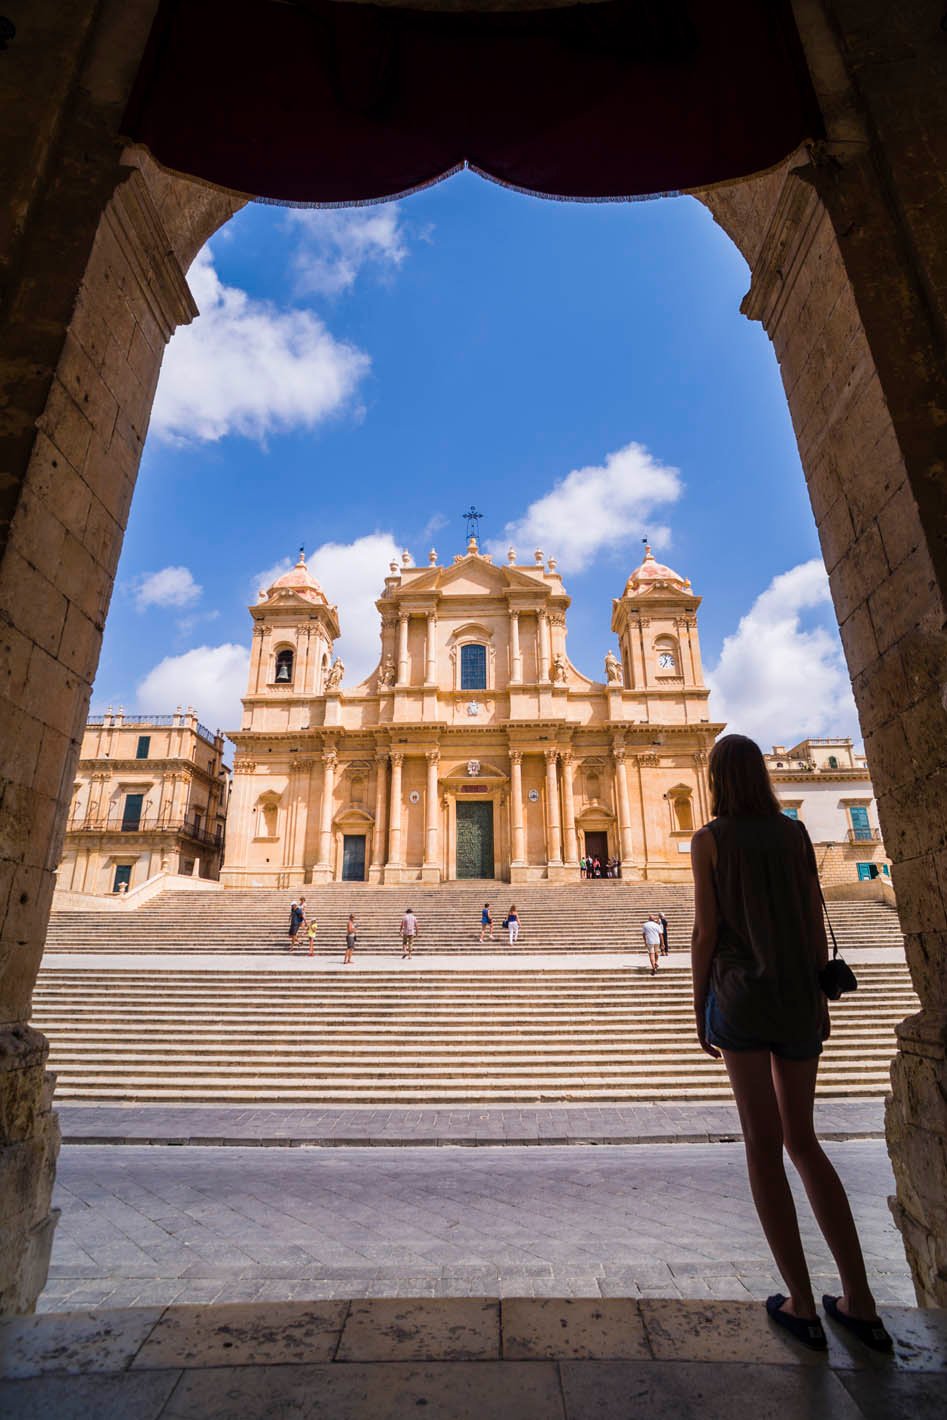 Tourist sightseeing at Duomo (Noto Cathedral, St Nicholas Cathedral, Cattedrale di Noto), a Baroque